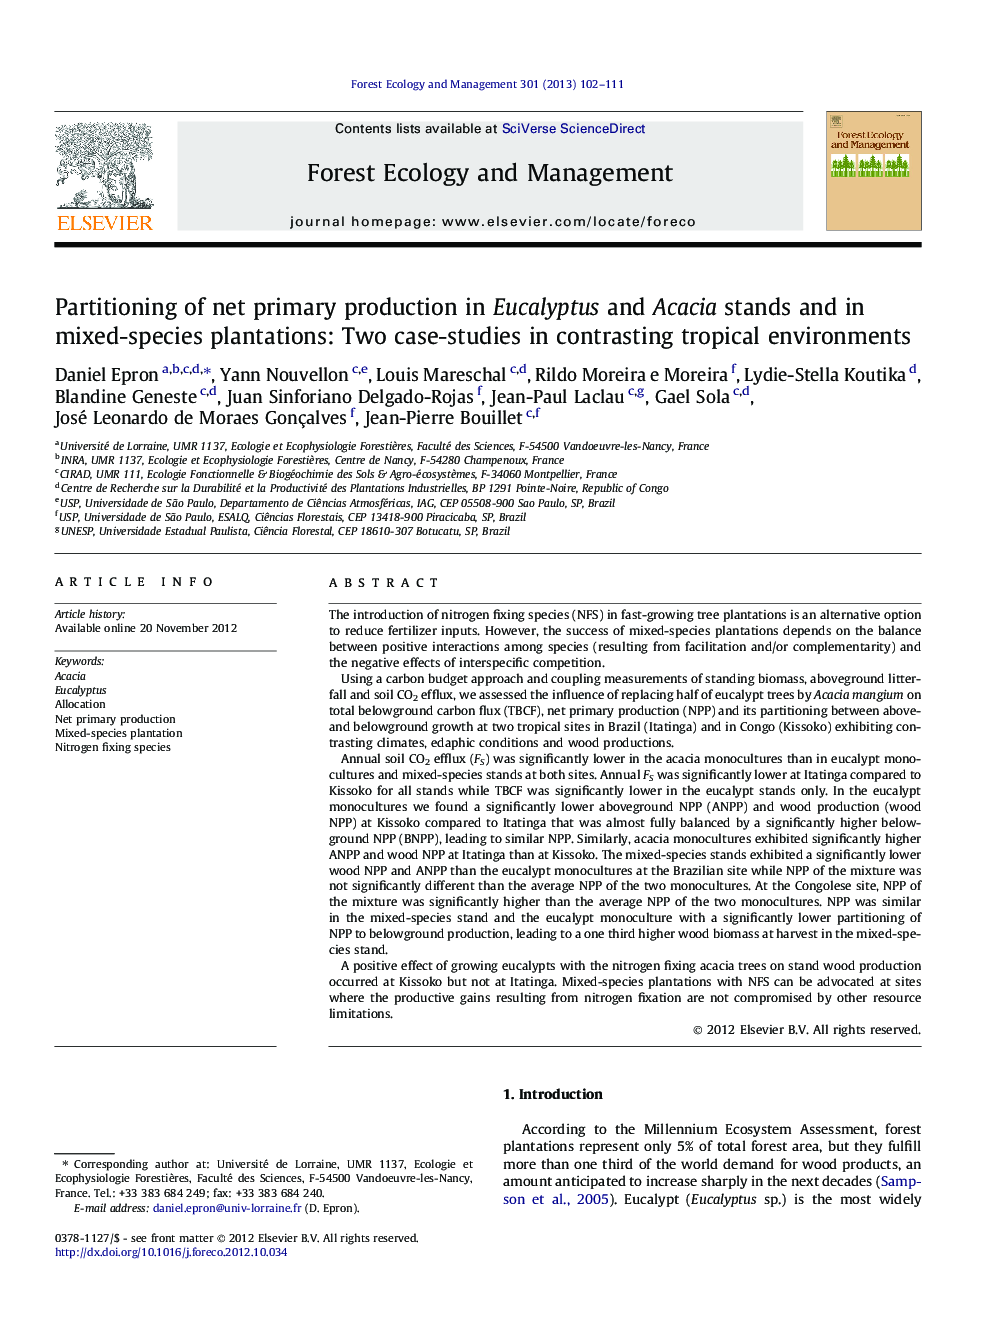 Partitioning of net primary production in Eucalyptus and Acacia stands and in mixed-species plantations: Two case-studies in contrasting tropical environments